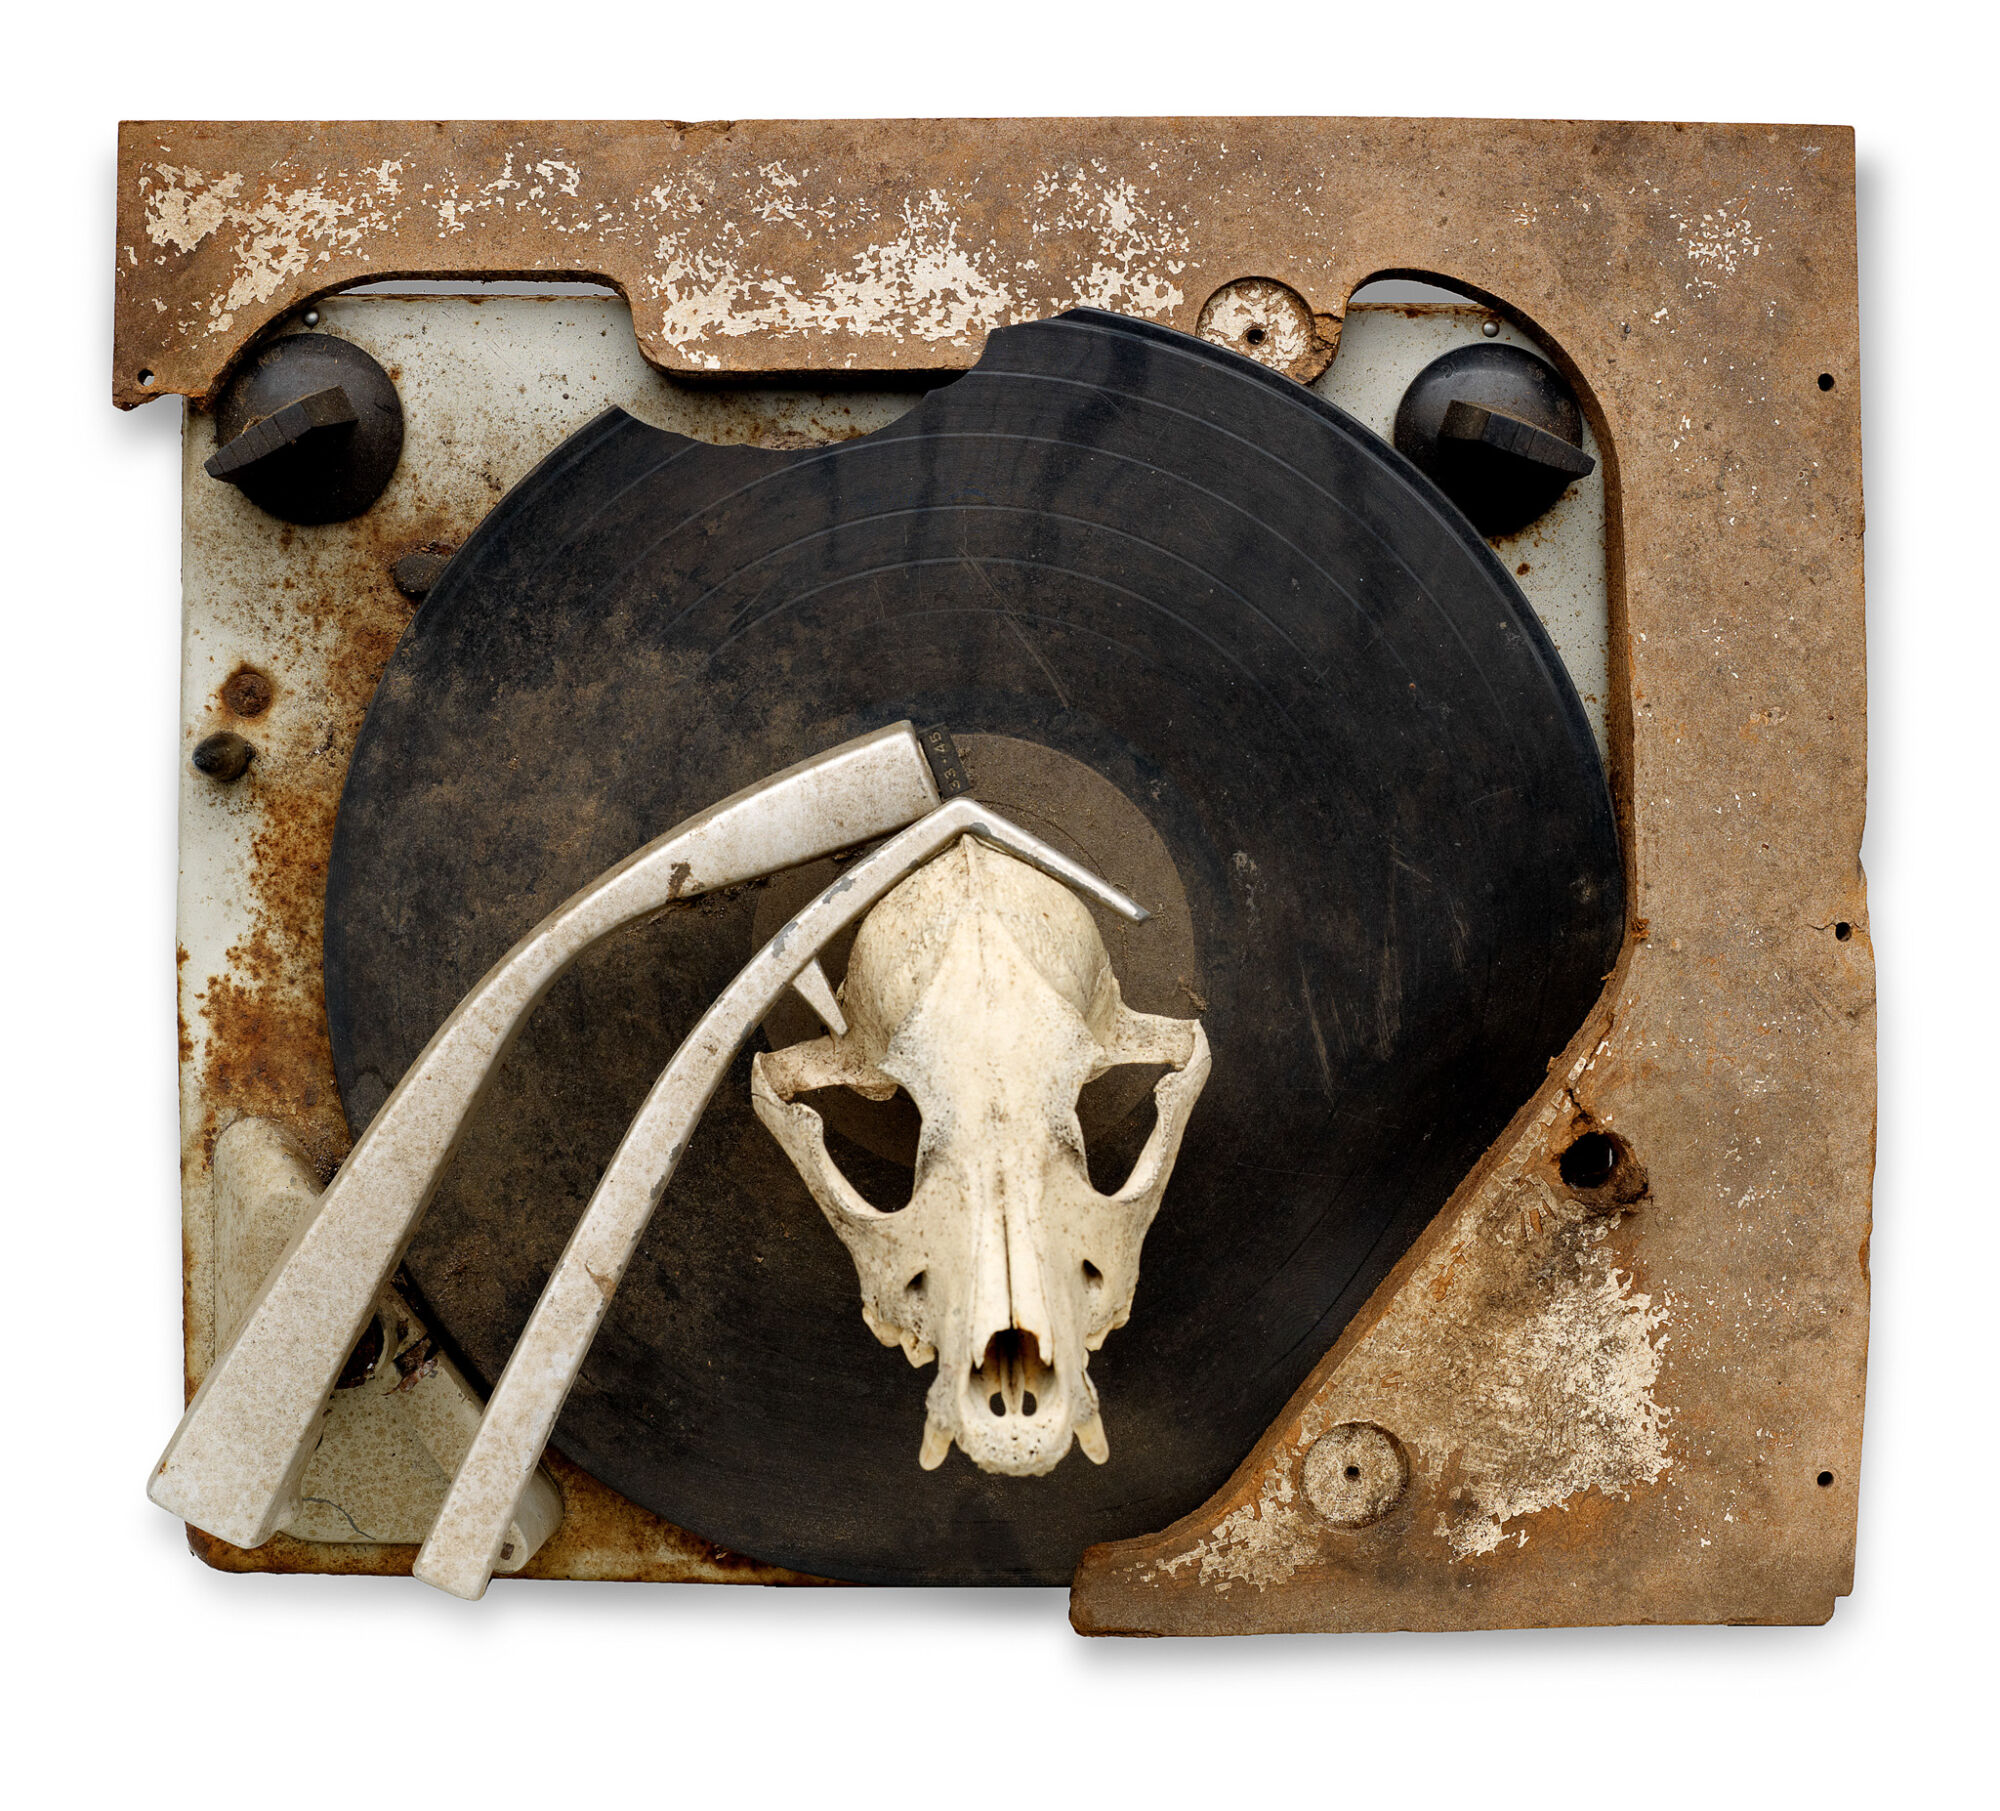 The Wick - Lonnie Holley, Keeping a Record of It (Harmful Music), 1986. Salvaged phonograph top, phonograph record, animal skull, 34.9 x 40 cm. Souls Grown Deep Foundation, Atlanta. © 2023 Lonnie Holley / Artists Rights Society (ARS), New York / DACS, London. Photo: Stephen Pitkin/Pitkin Studio